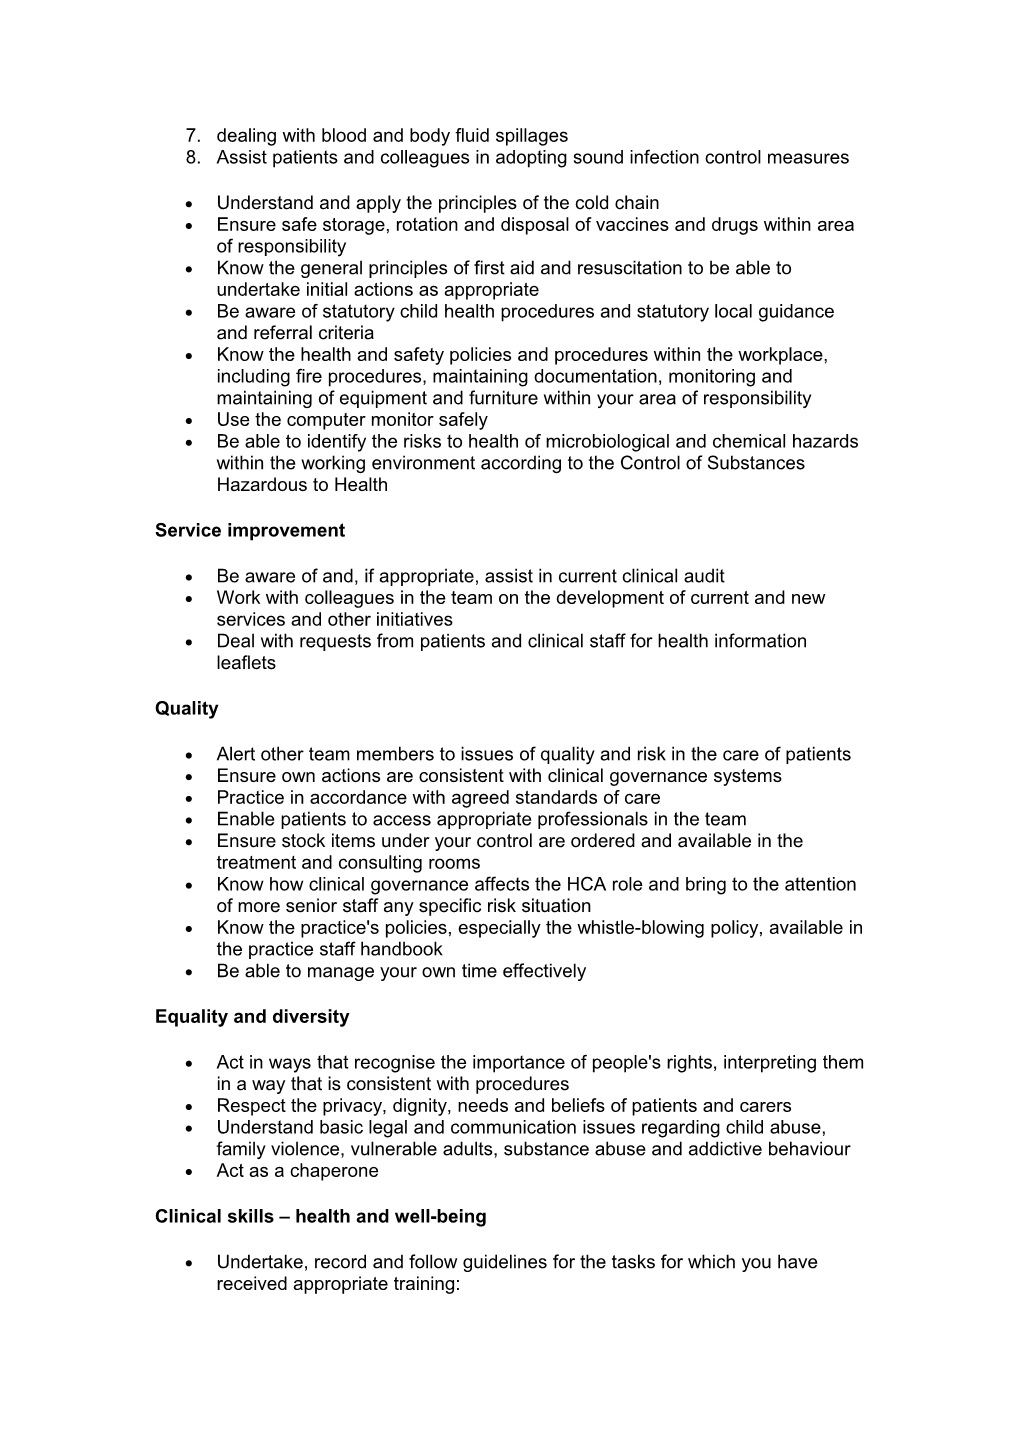 Health Care Assistant Person Specification